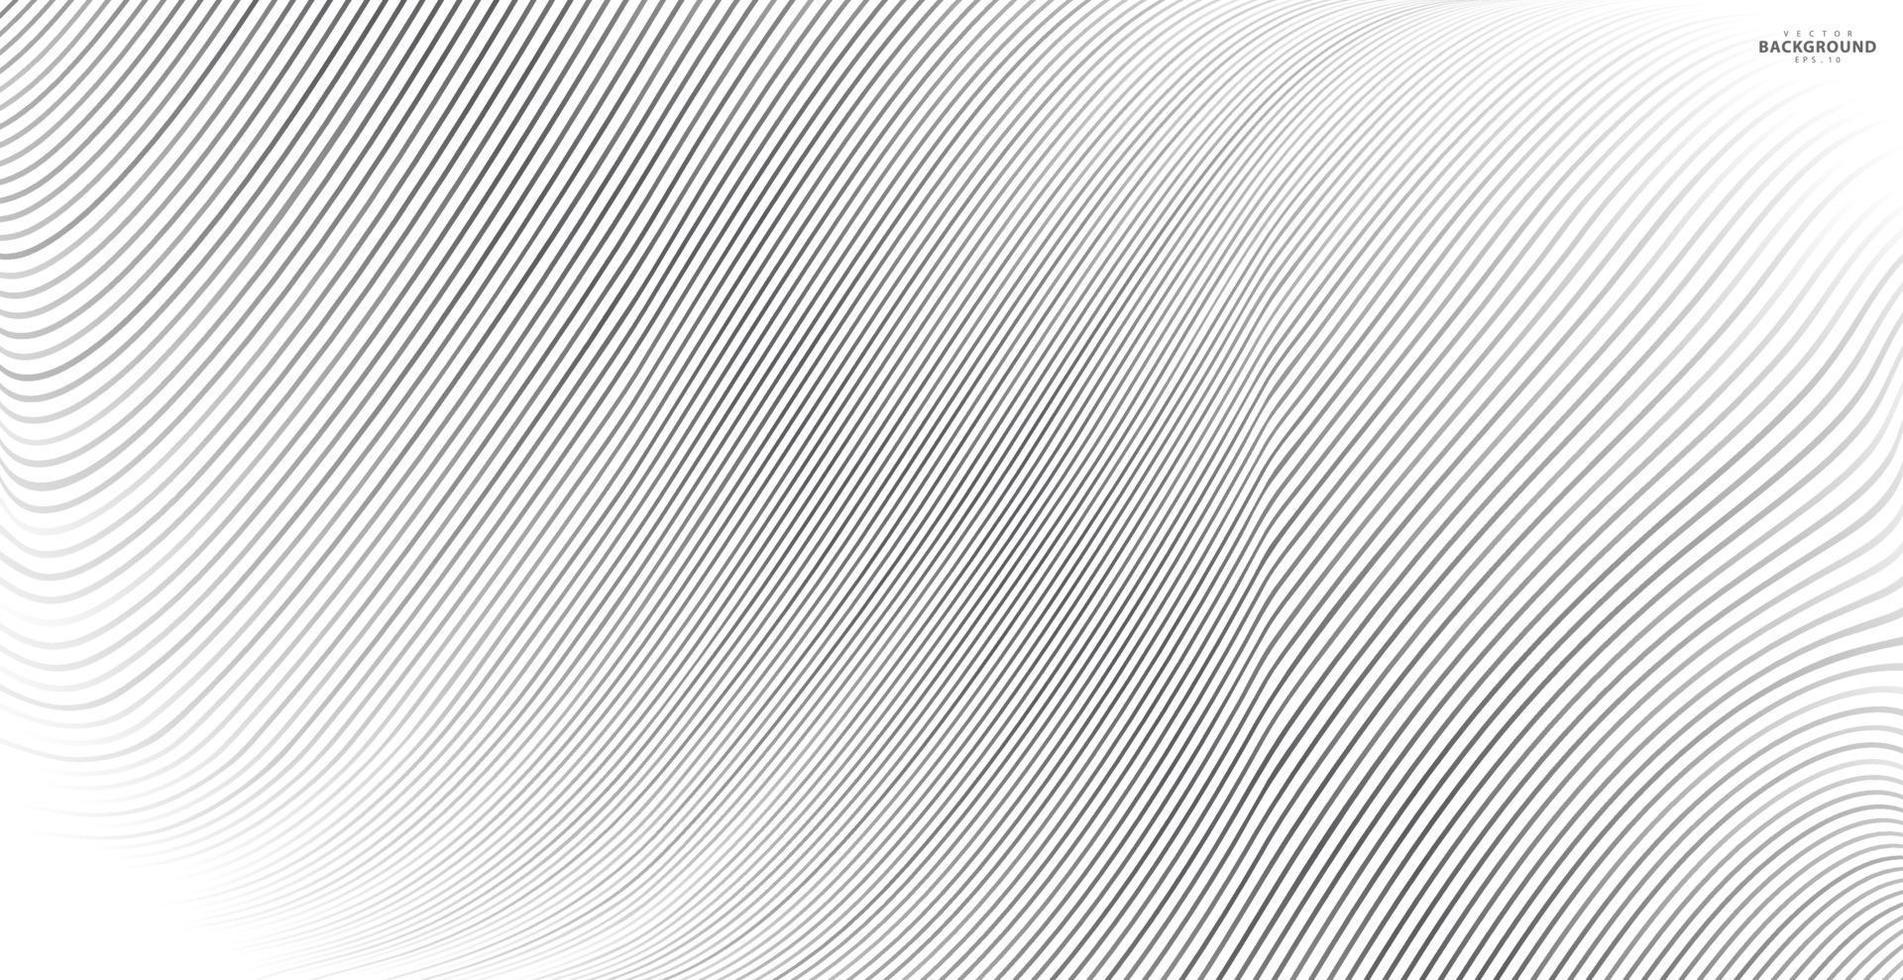 Abstract warped Diagonal Striped Background. curved twisted slanting vector